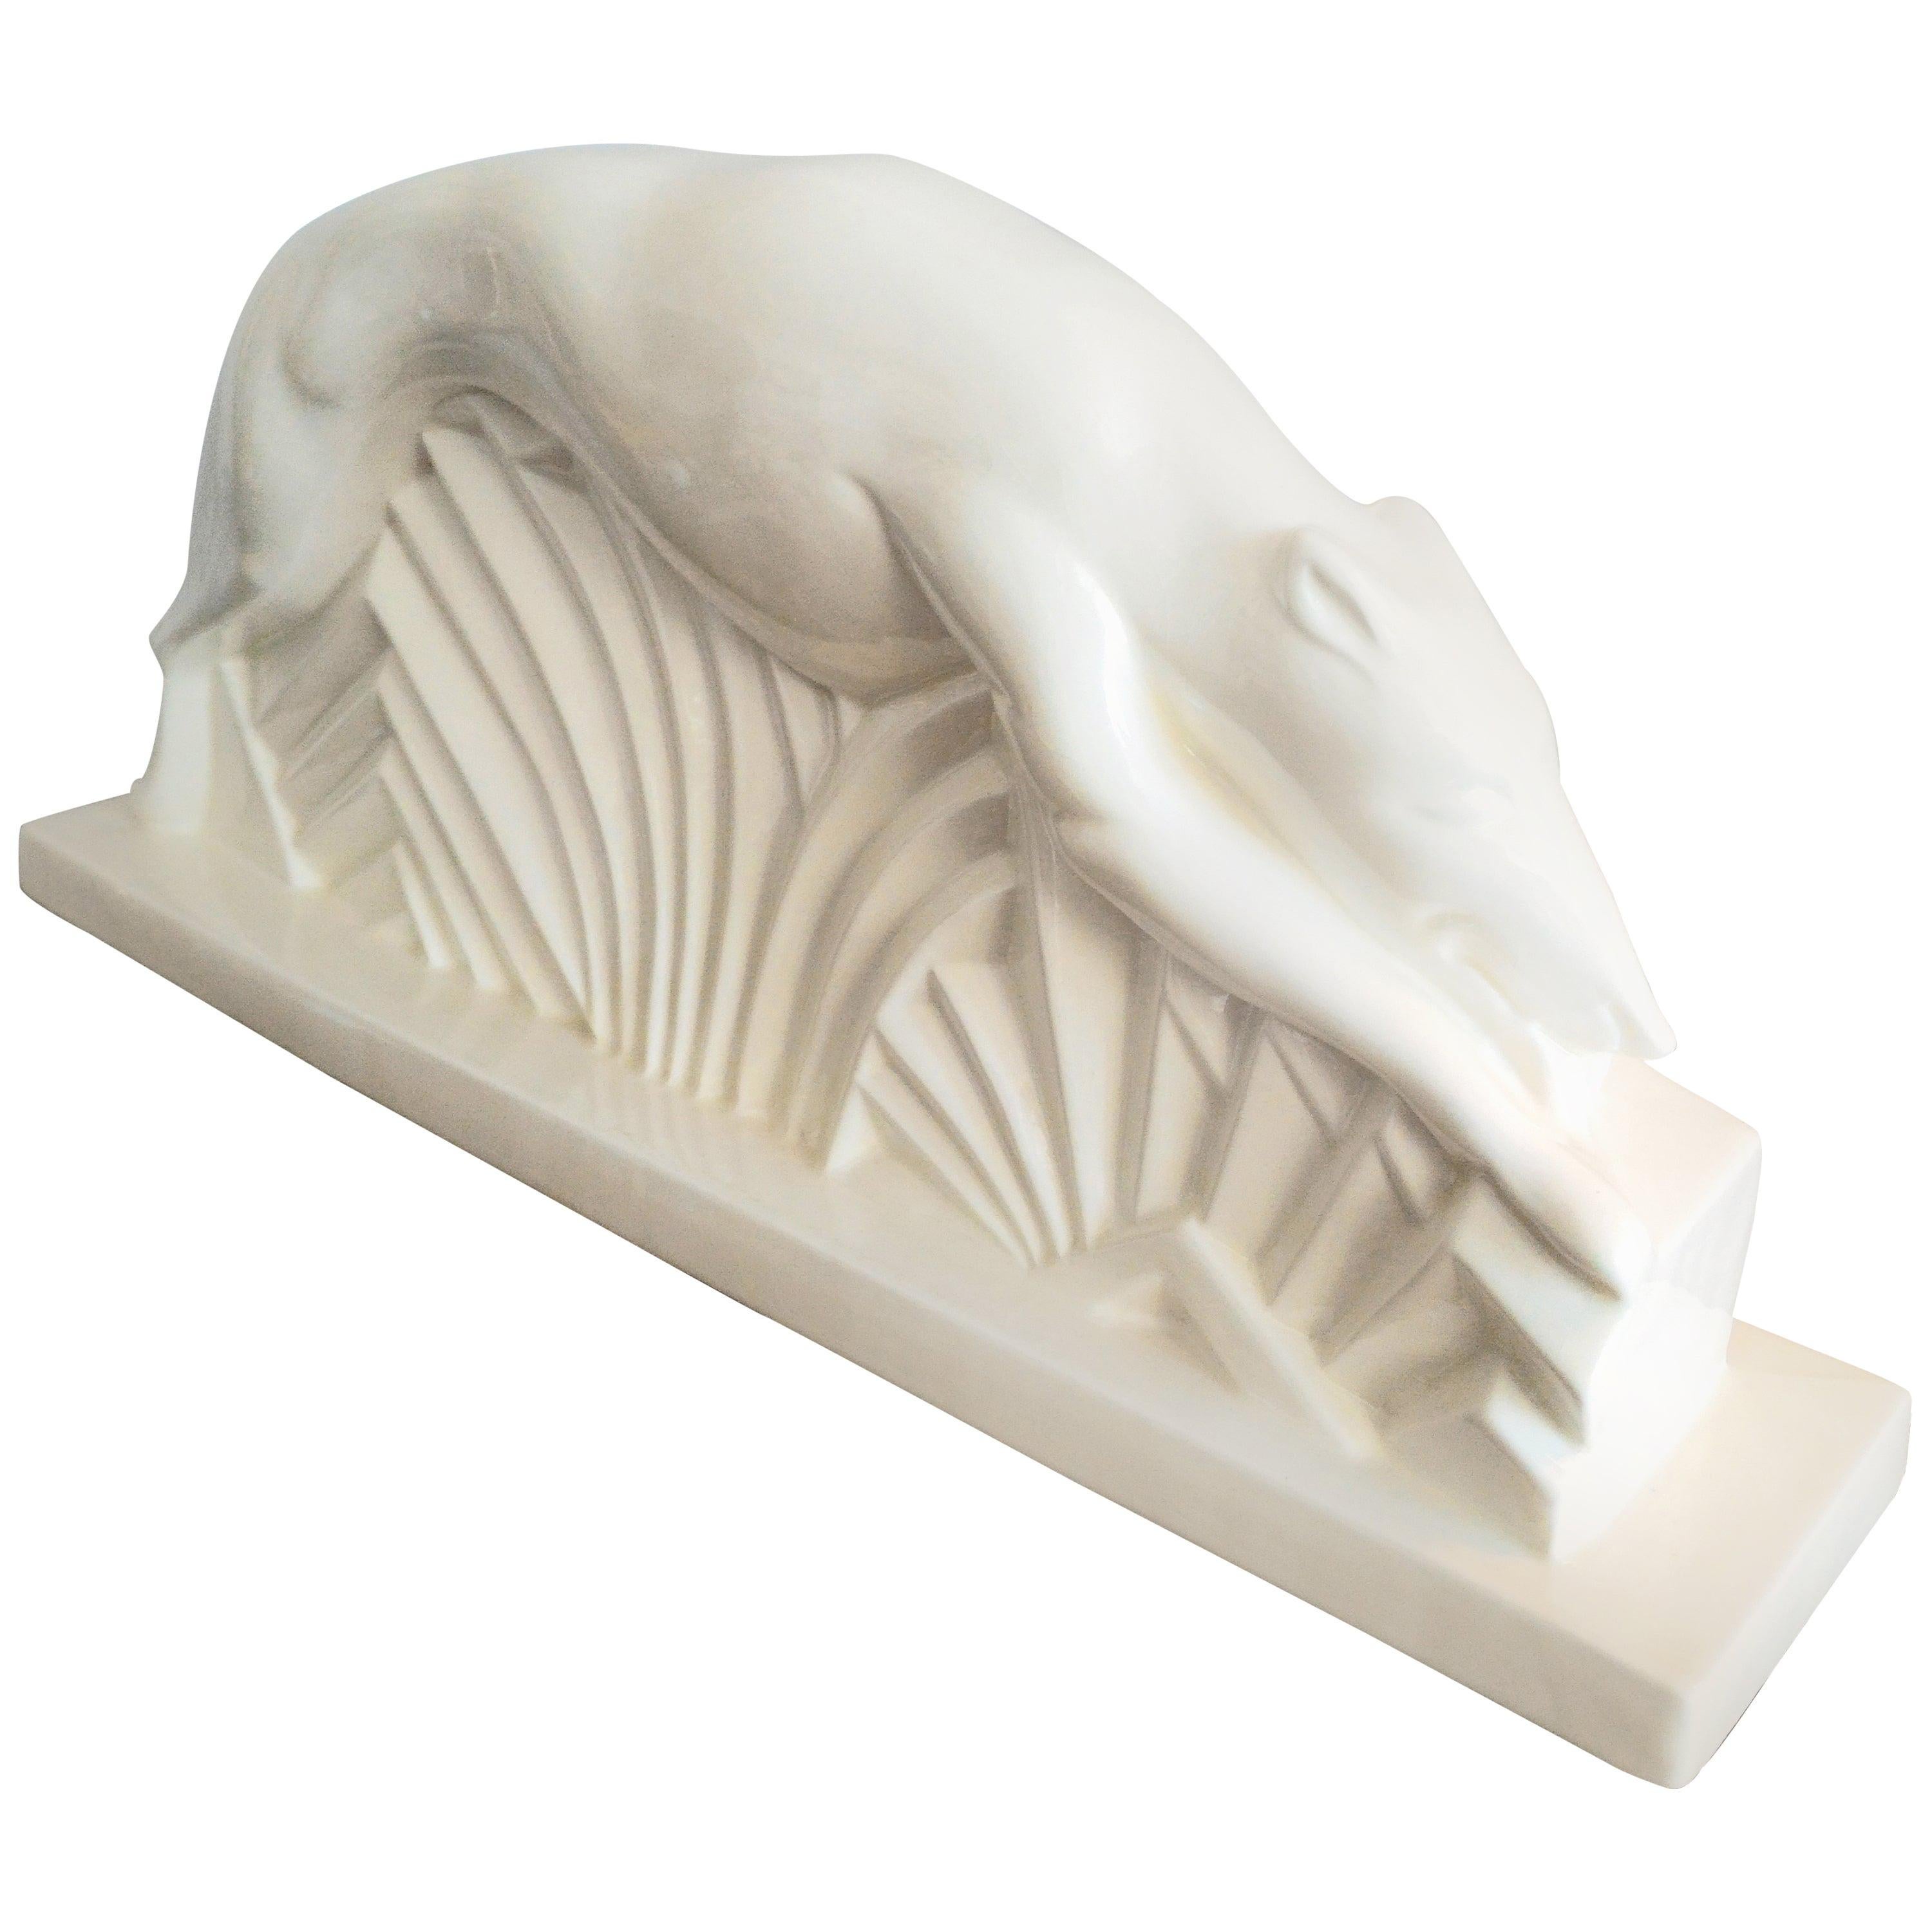 French Art Deco Greyhound Dog Sculpture For Sale